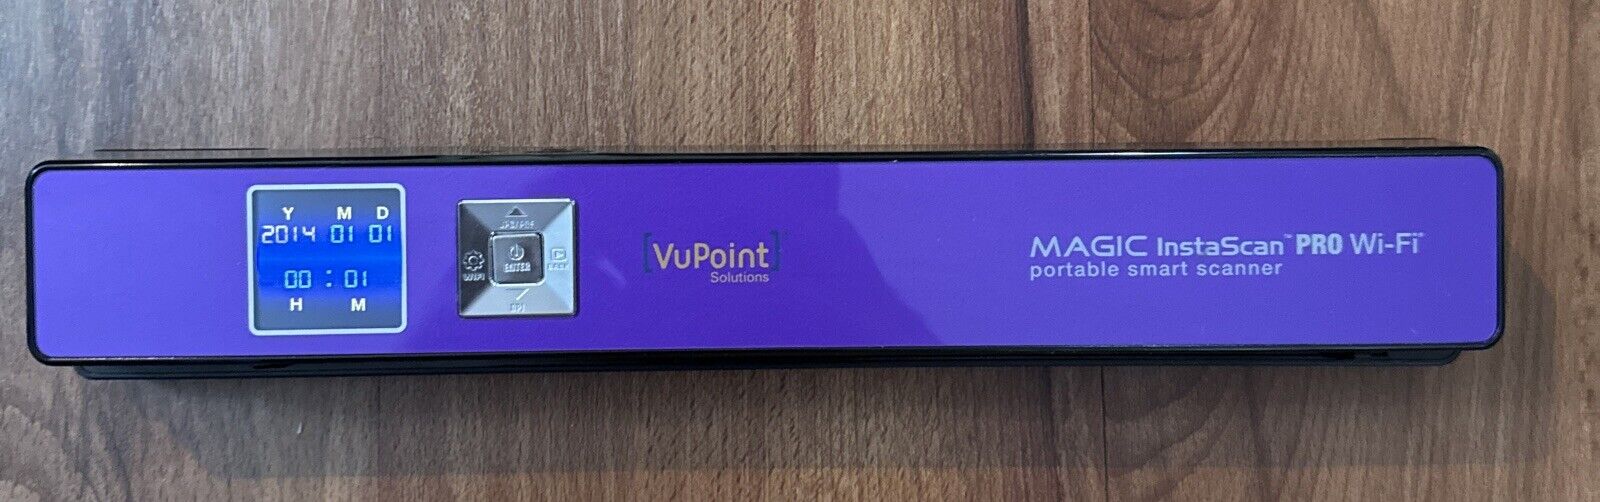 VuPoint Magic InstaScan Pro Portable Wi-Fi Smart Scanner